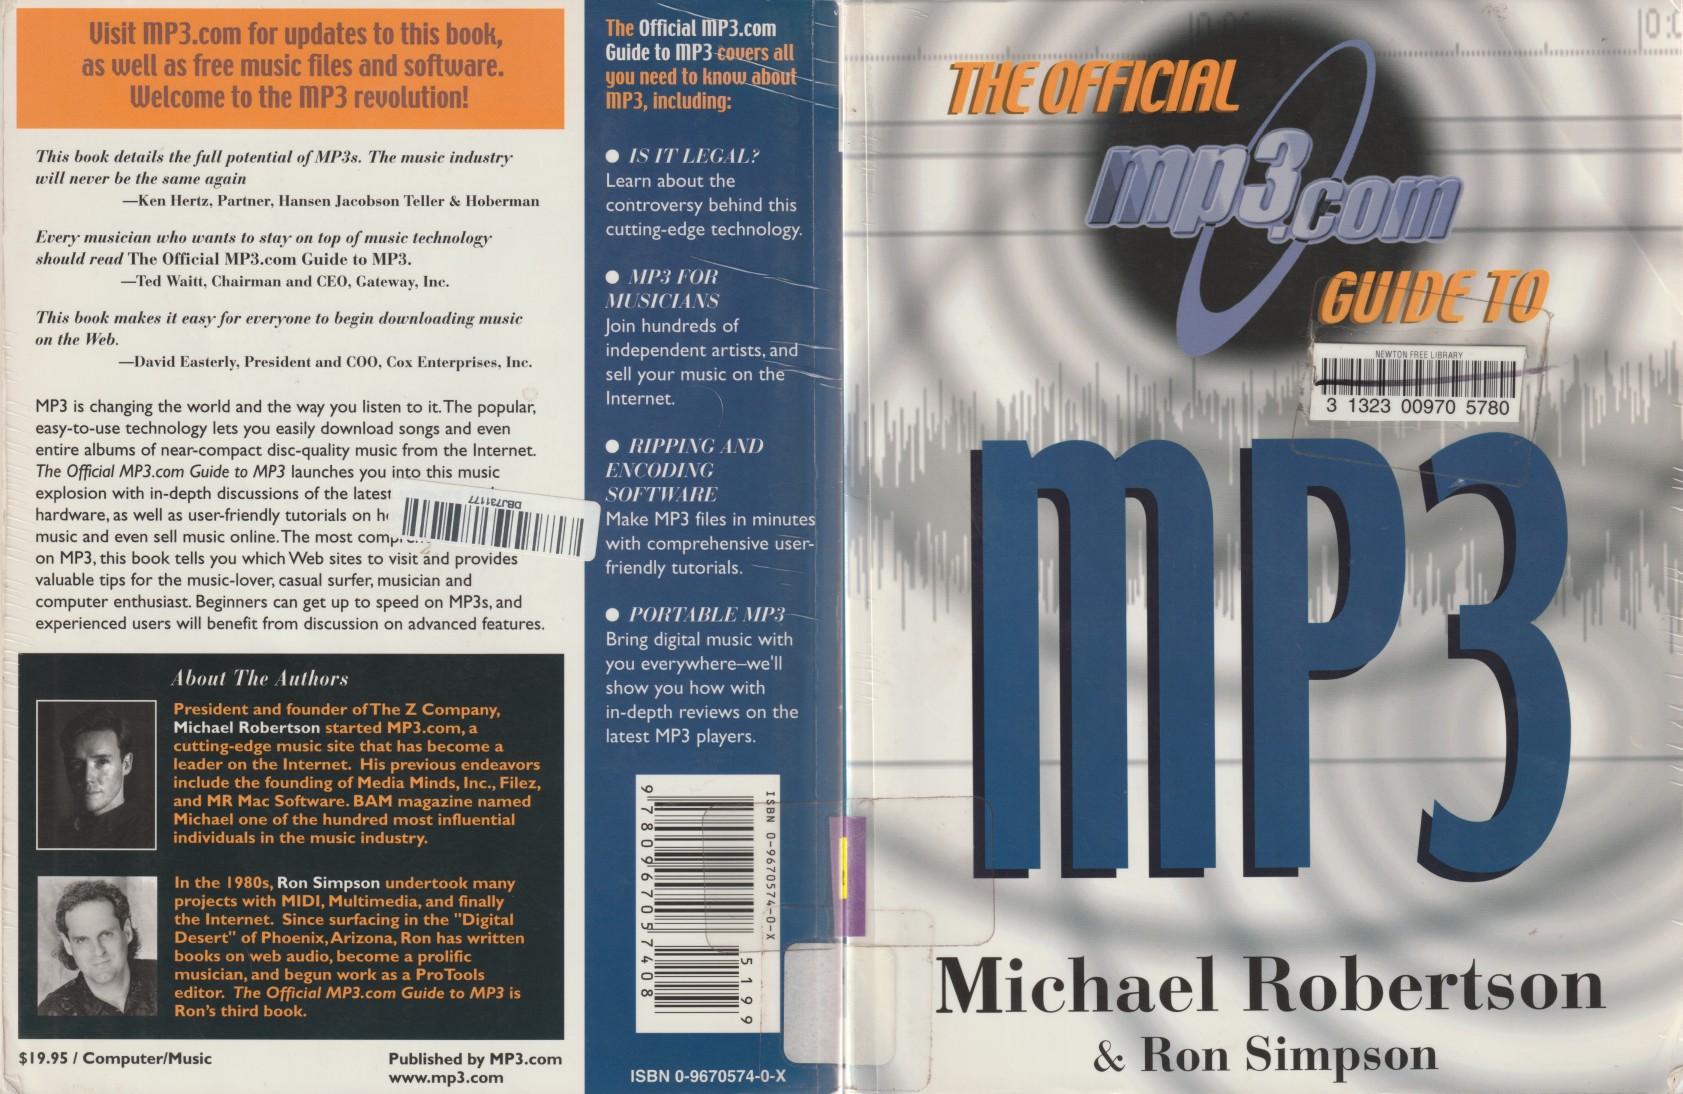 The front and back covers of the MP3.com Official Guide to MP3s